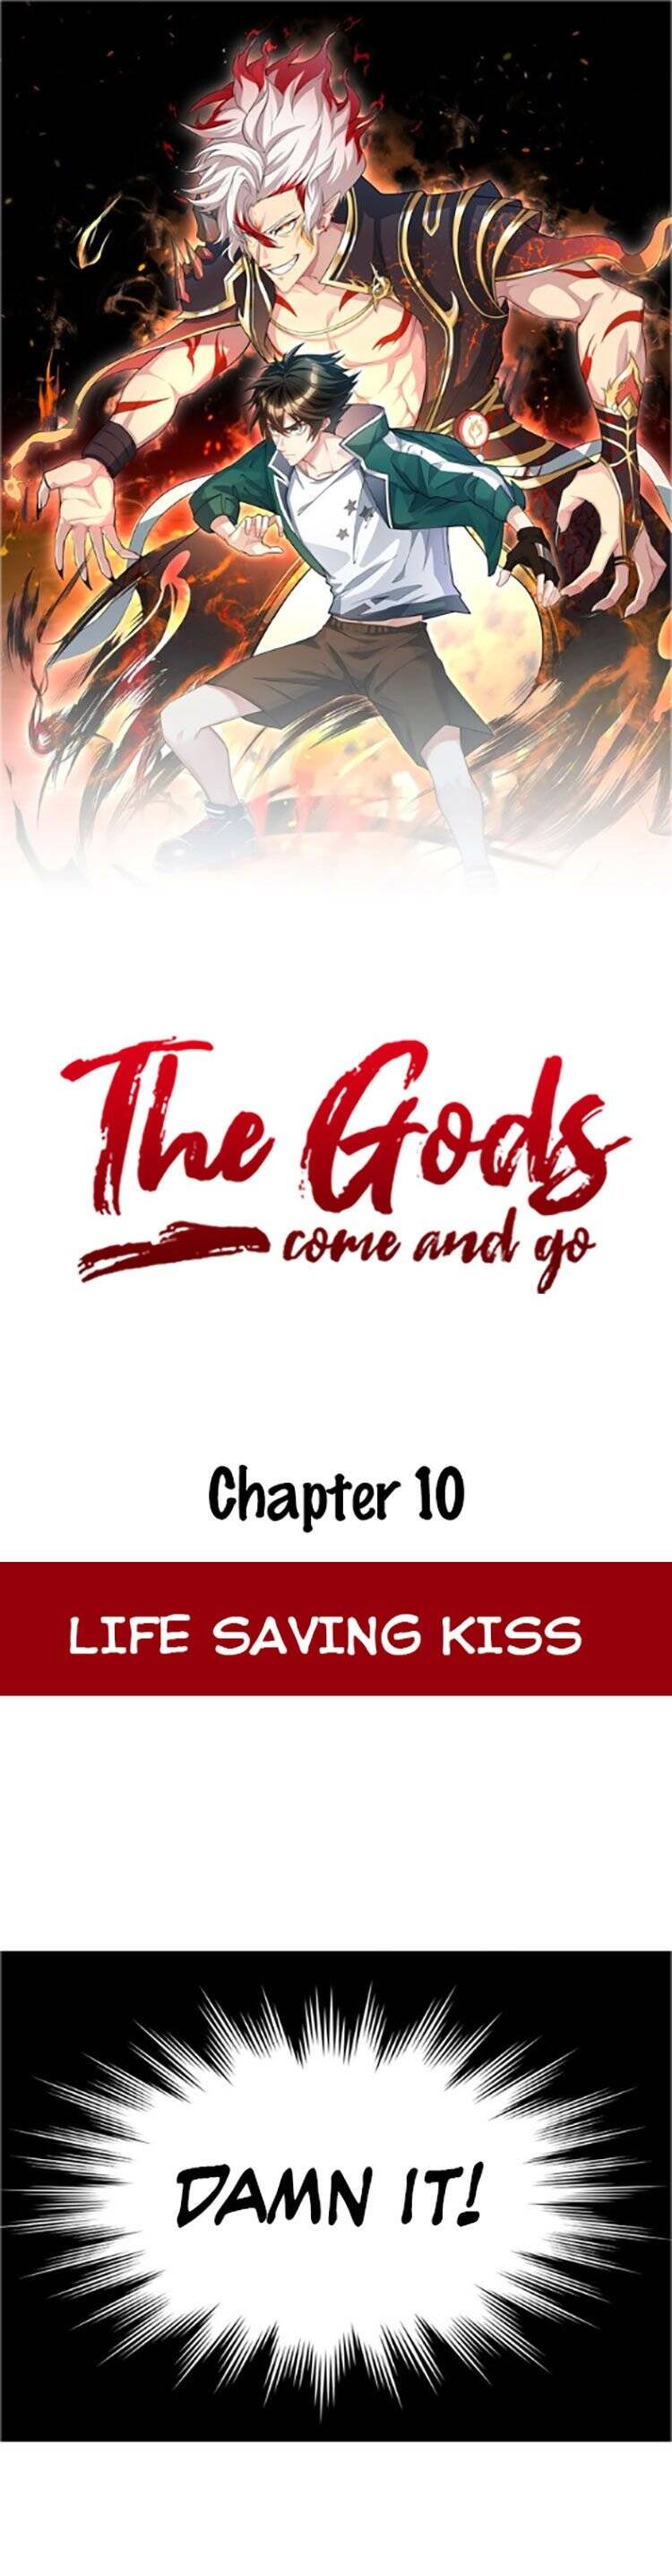 The Gods, Comes And Go Chapter 10 #2